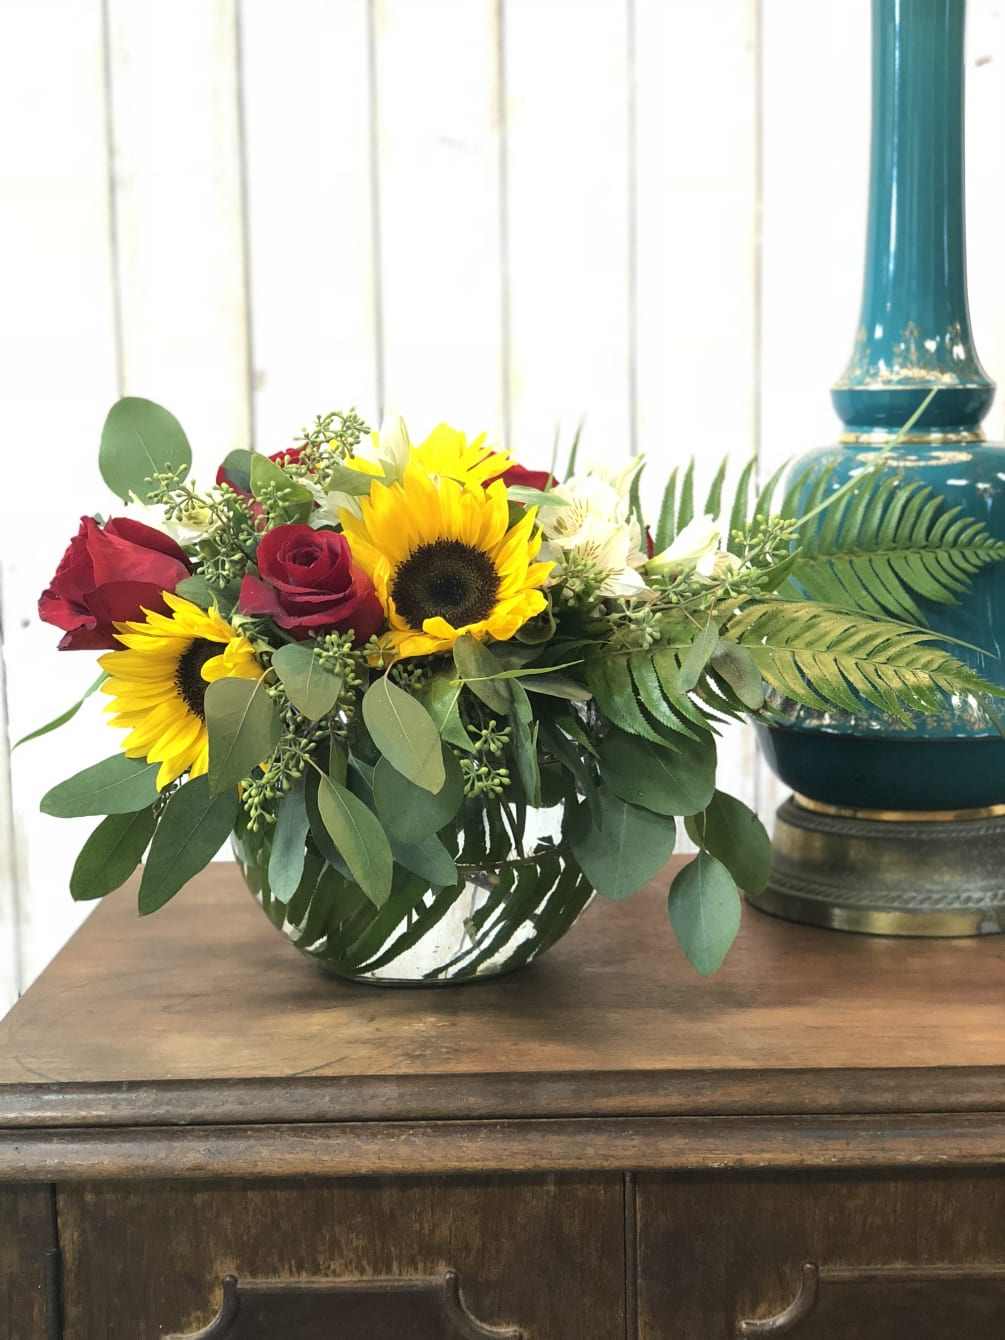 say thanks to the one who inspires you Sunflowers bouquet is constructed